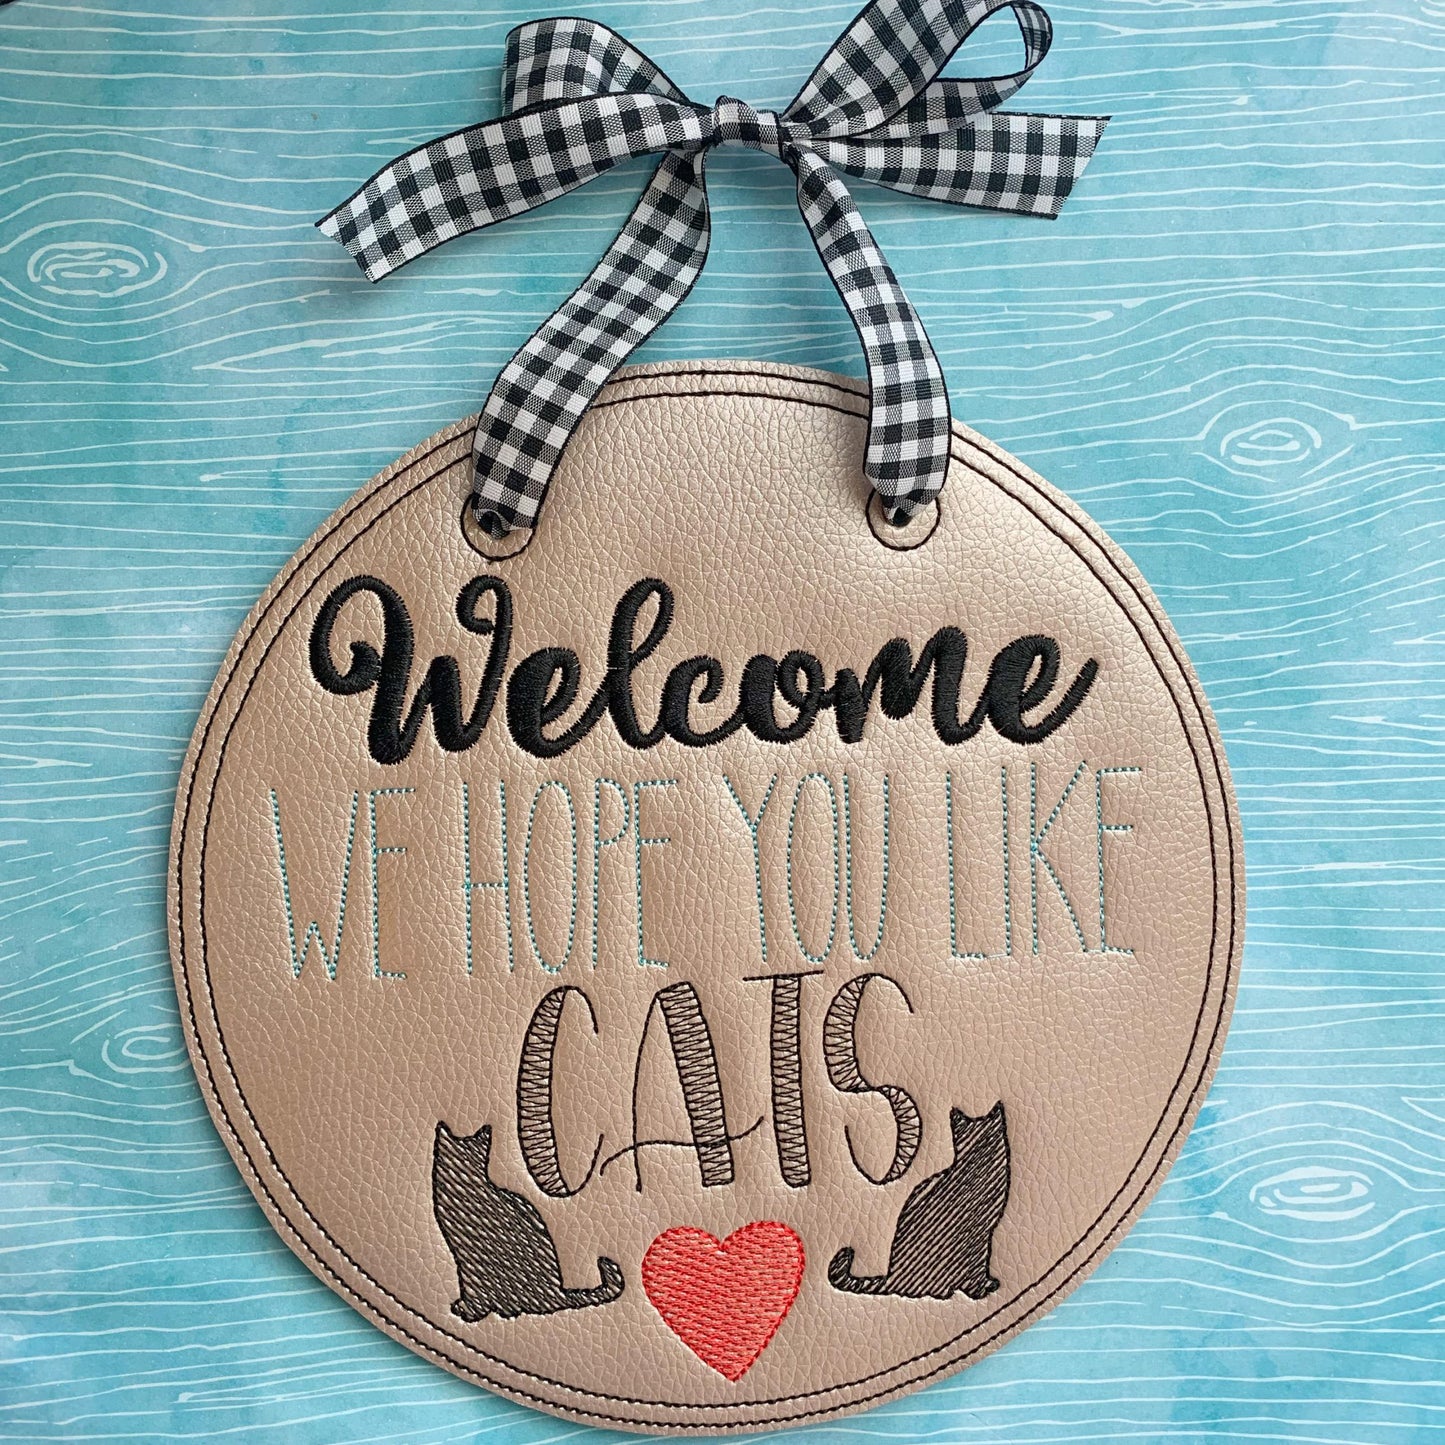 Welcome We Hope You Like Cats Door Hanger - 3 sizes - Digital Embroidery Design